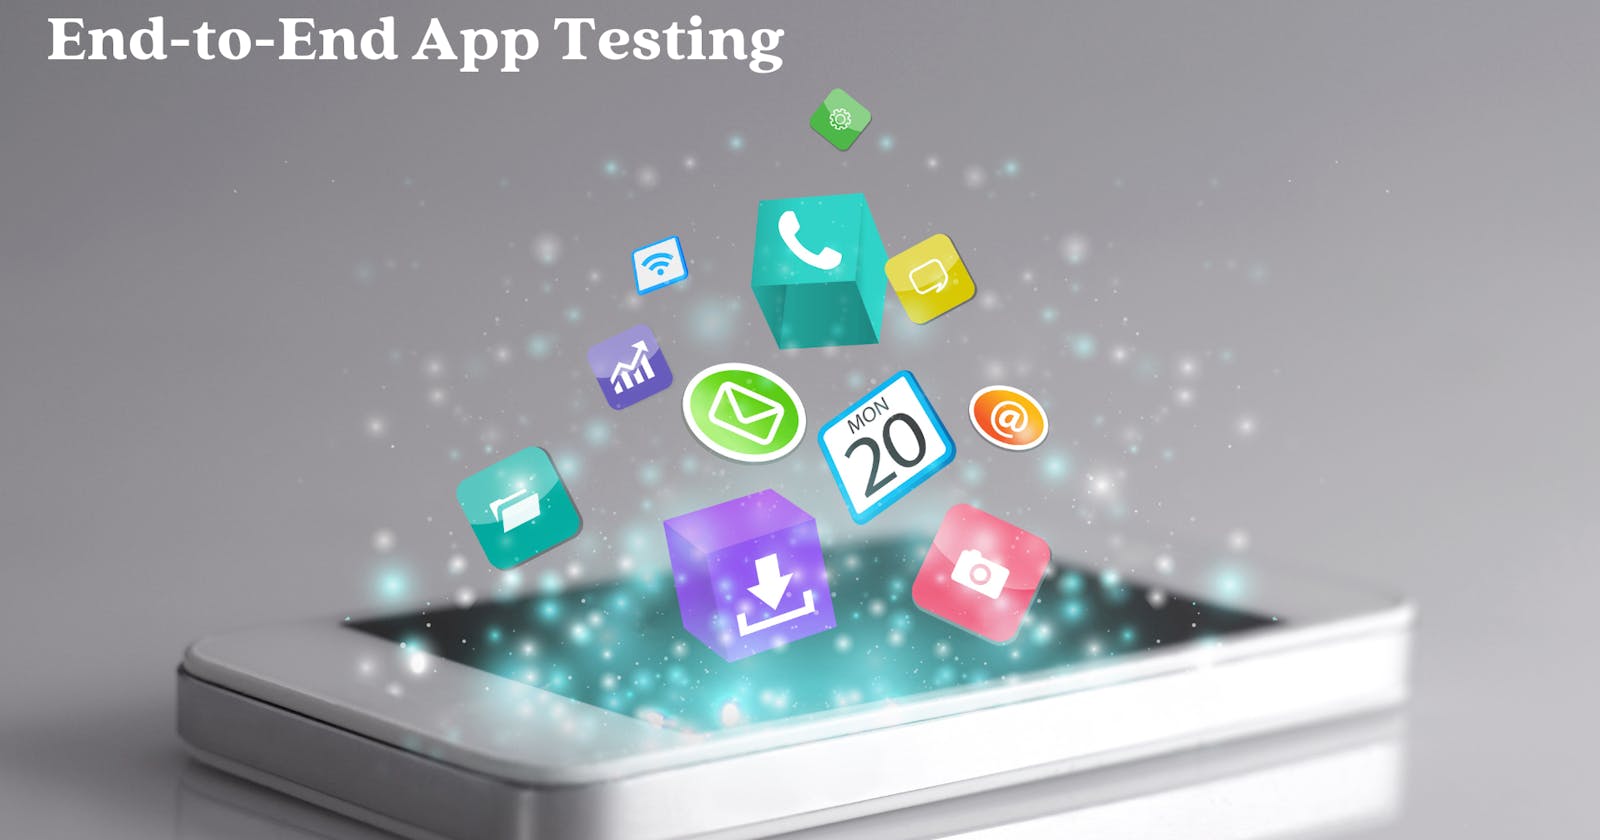 End-to-End App Testing